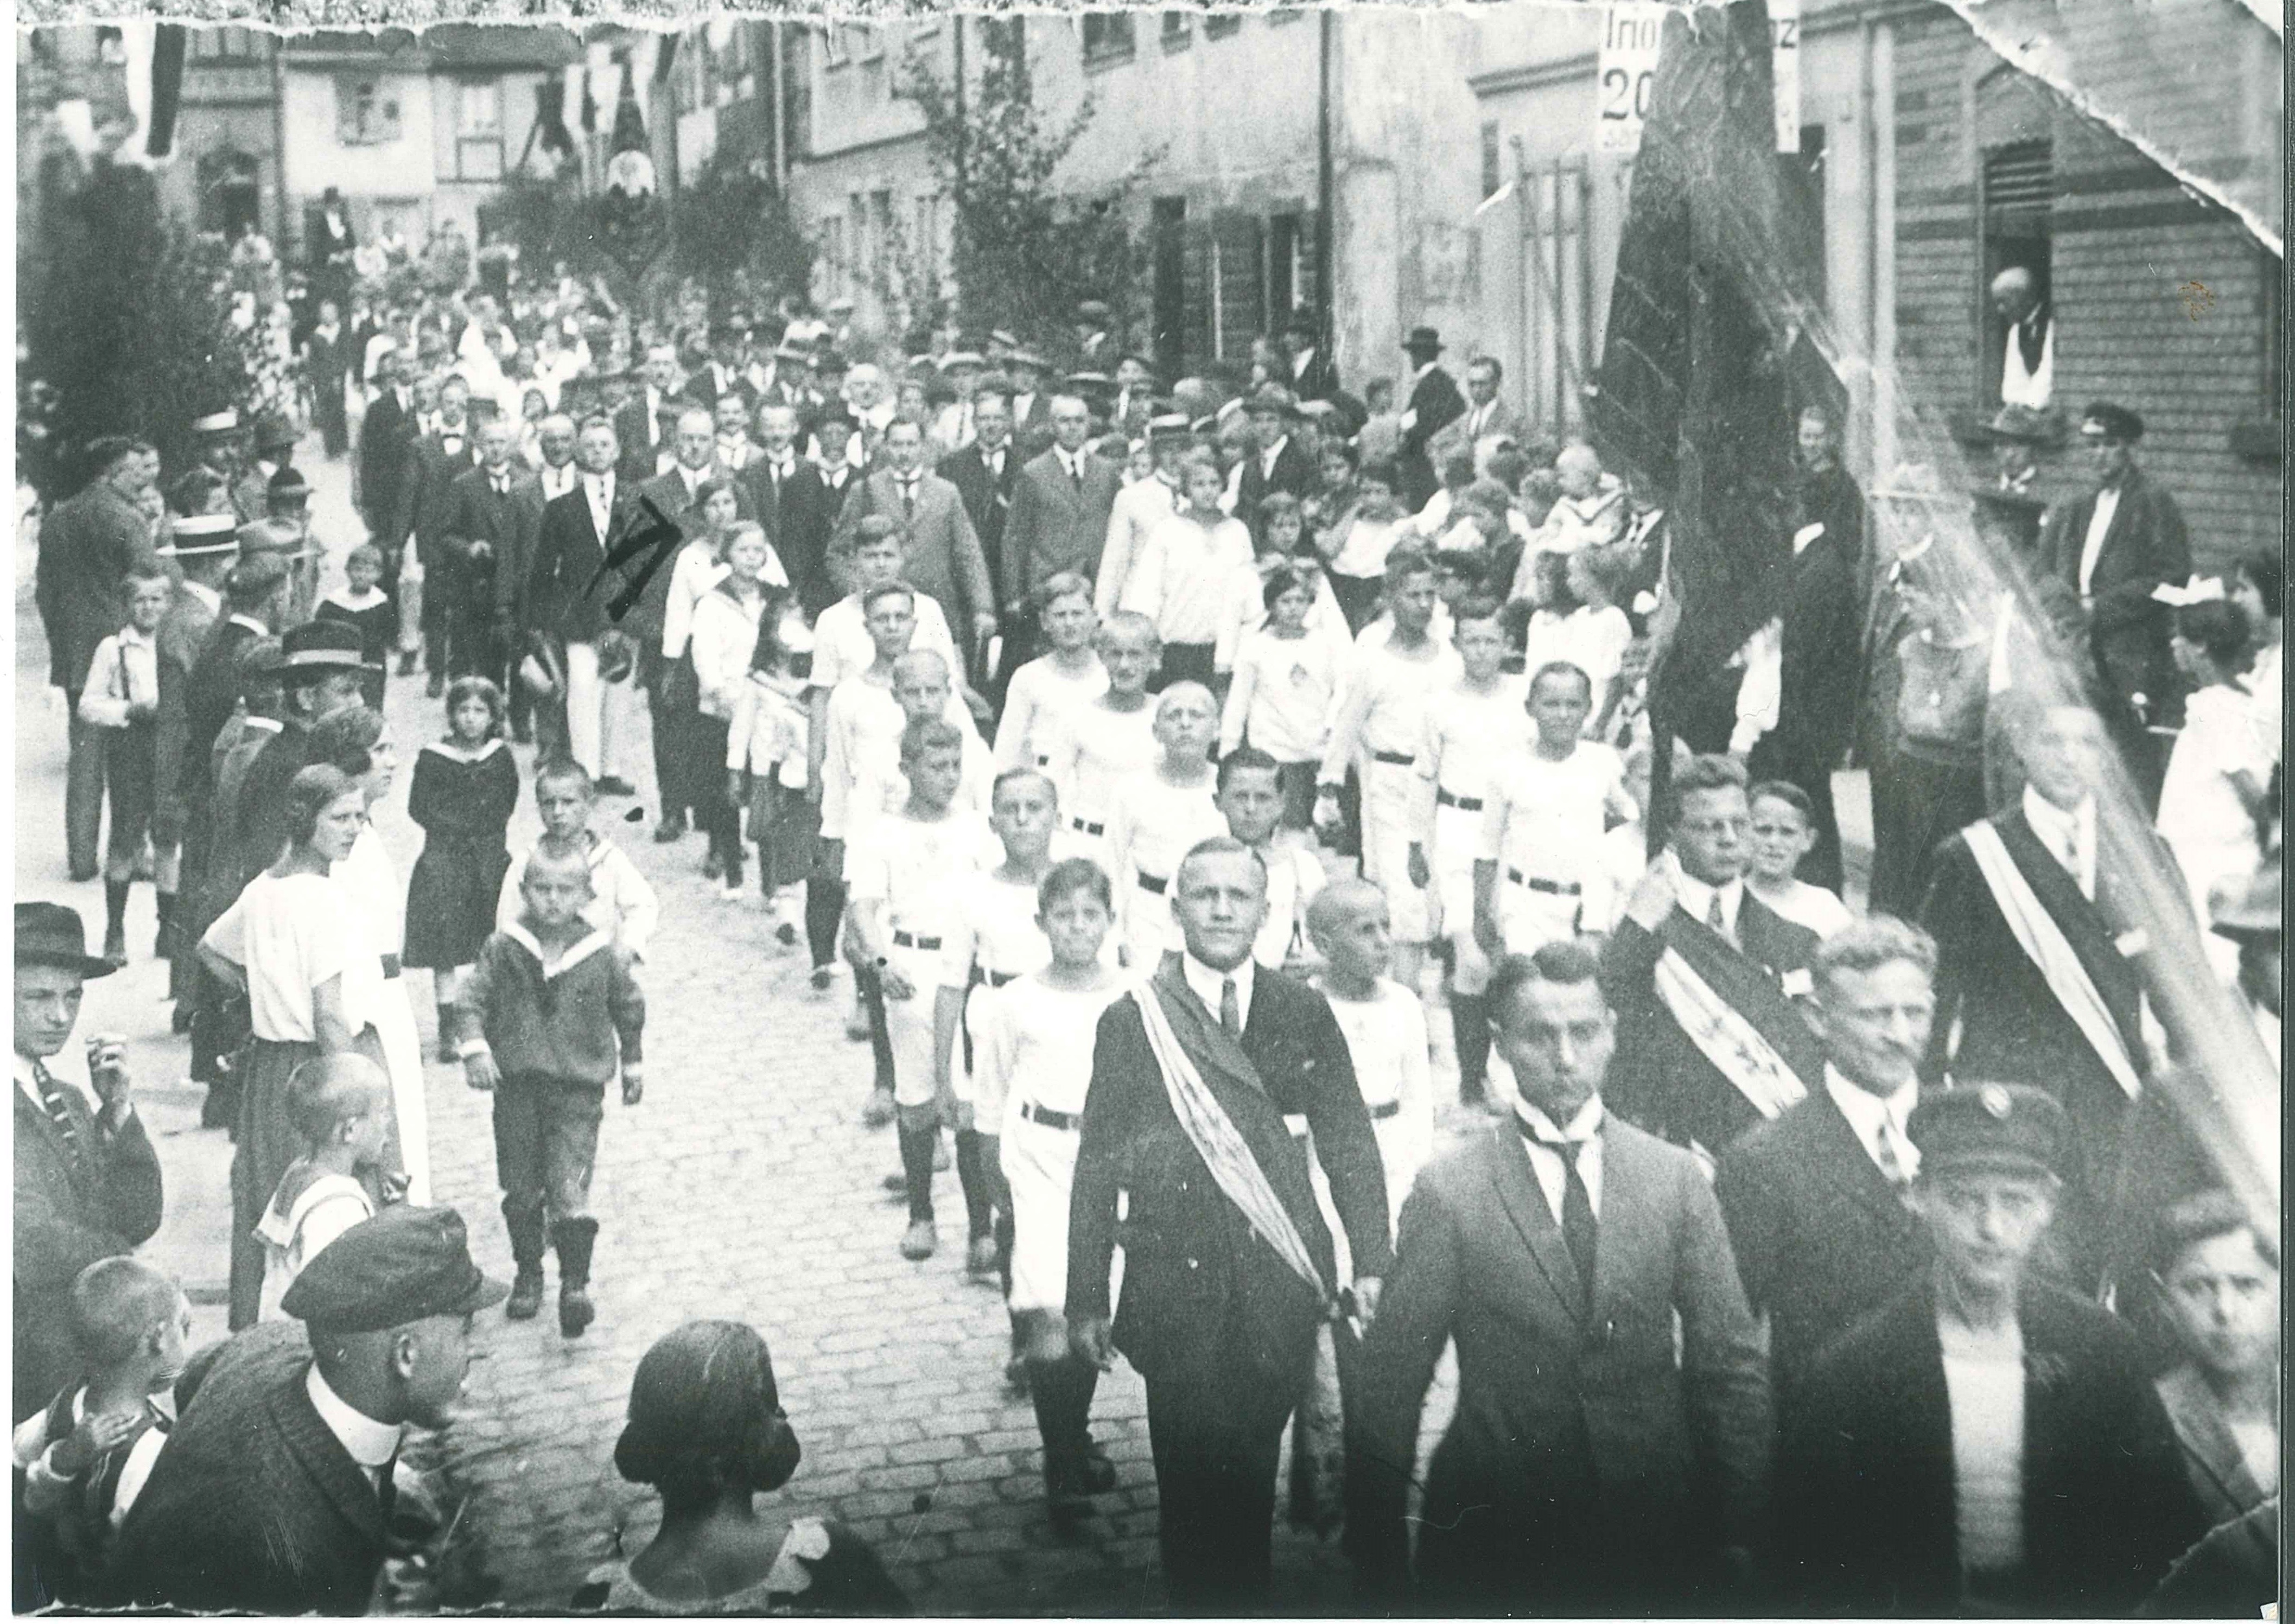 Turnfest in Bendorf, 1921 (REM CC BY-NC-SA)